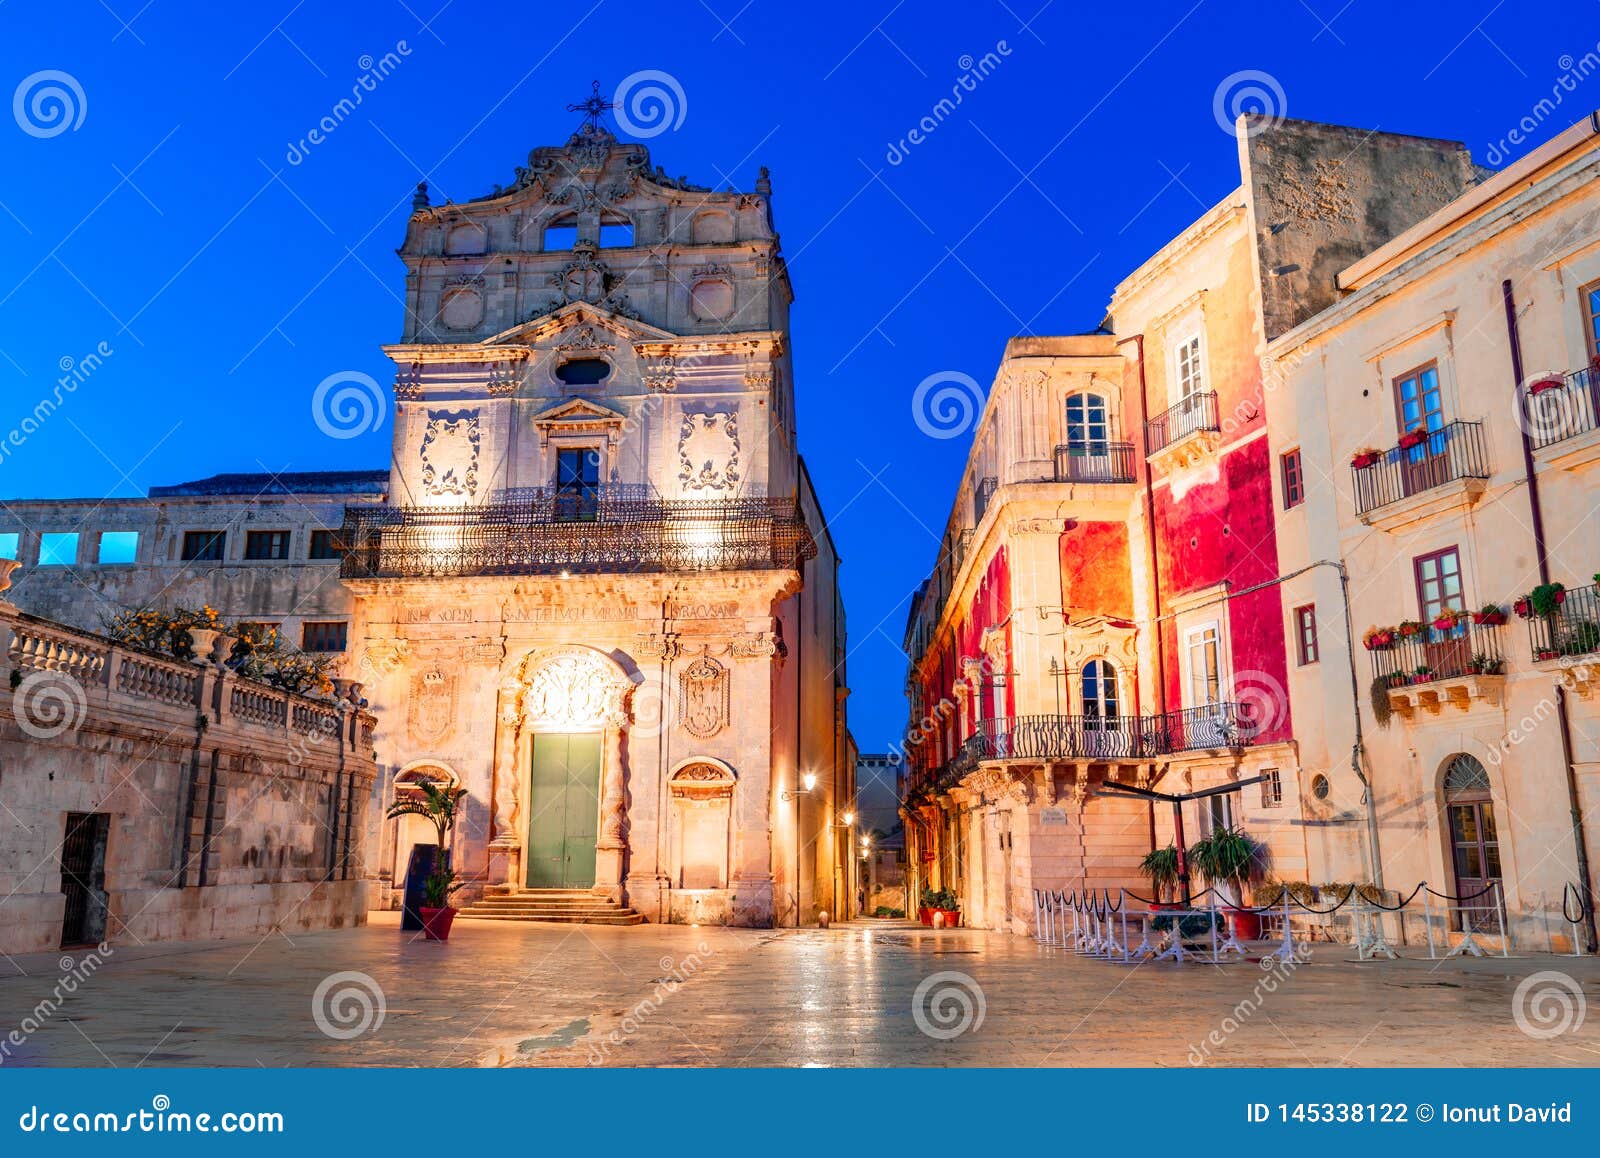 siracusa, sicily island, italy: night view of the  church with the burial of saint lucy, ortigia, syracuse